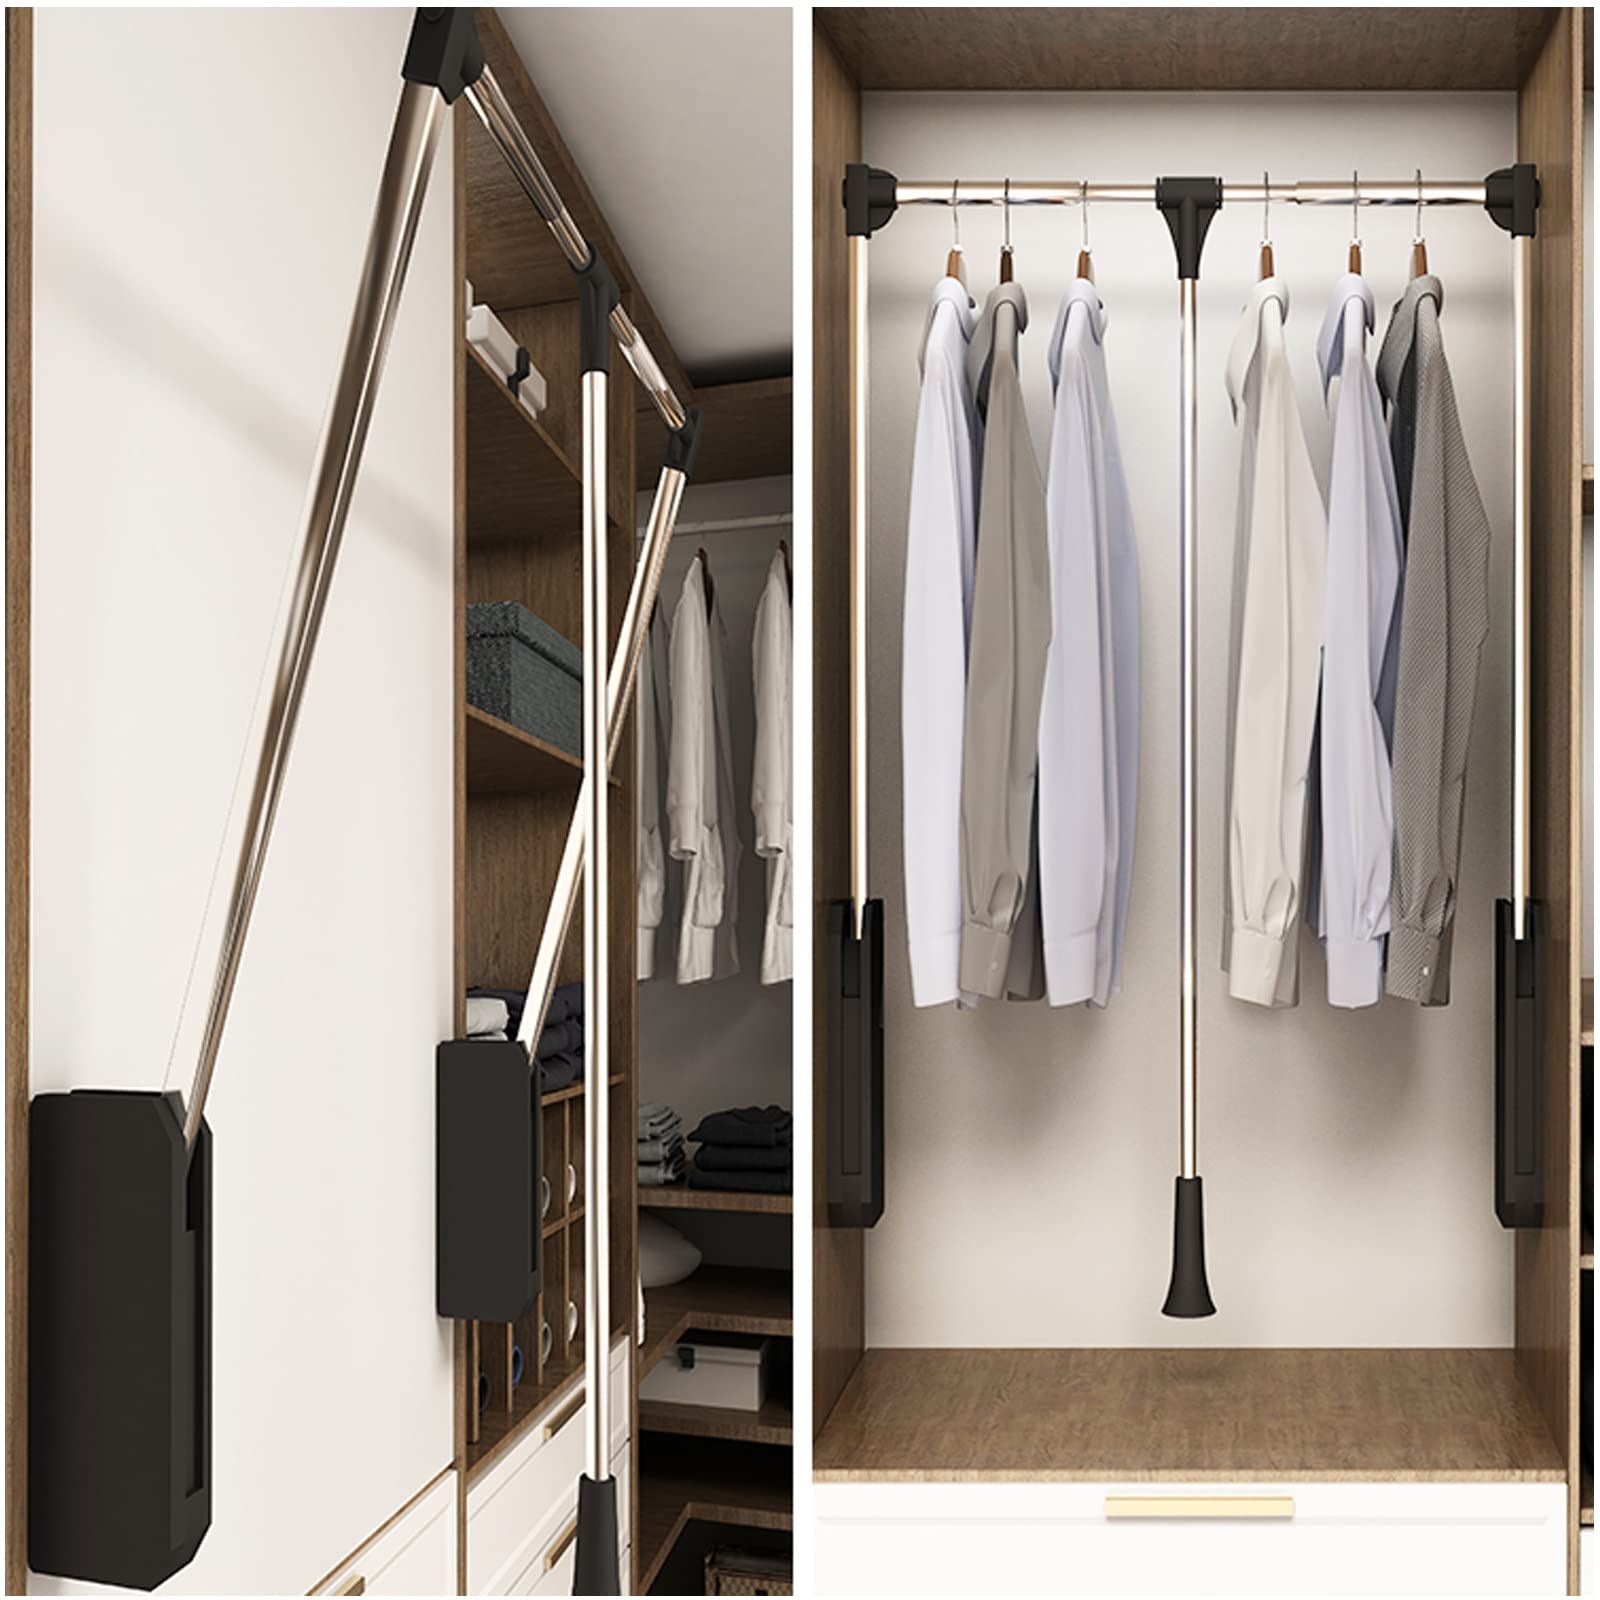 Wardrobes With Garment Rod For Most Current Amazon: Pull Down Closet Rod, Pull Down Wardrobe Organizer, 26 Lbs Load  Capacity, Adjustable 35 47 Inch For Hanging Clothes Wardrobe Lift Rail  Organizer, Heavy Duty Closet Pull Down Rods Hanger : Home (View 8 of 10)